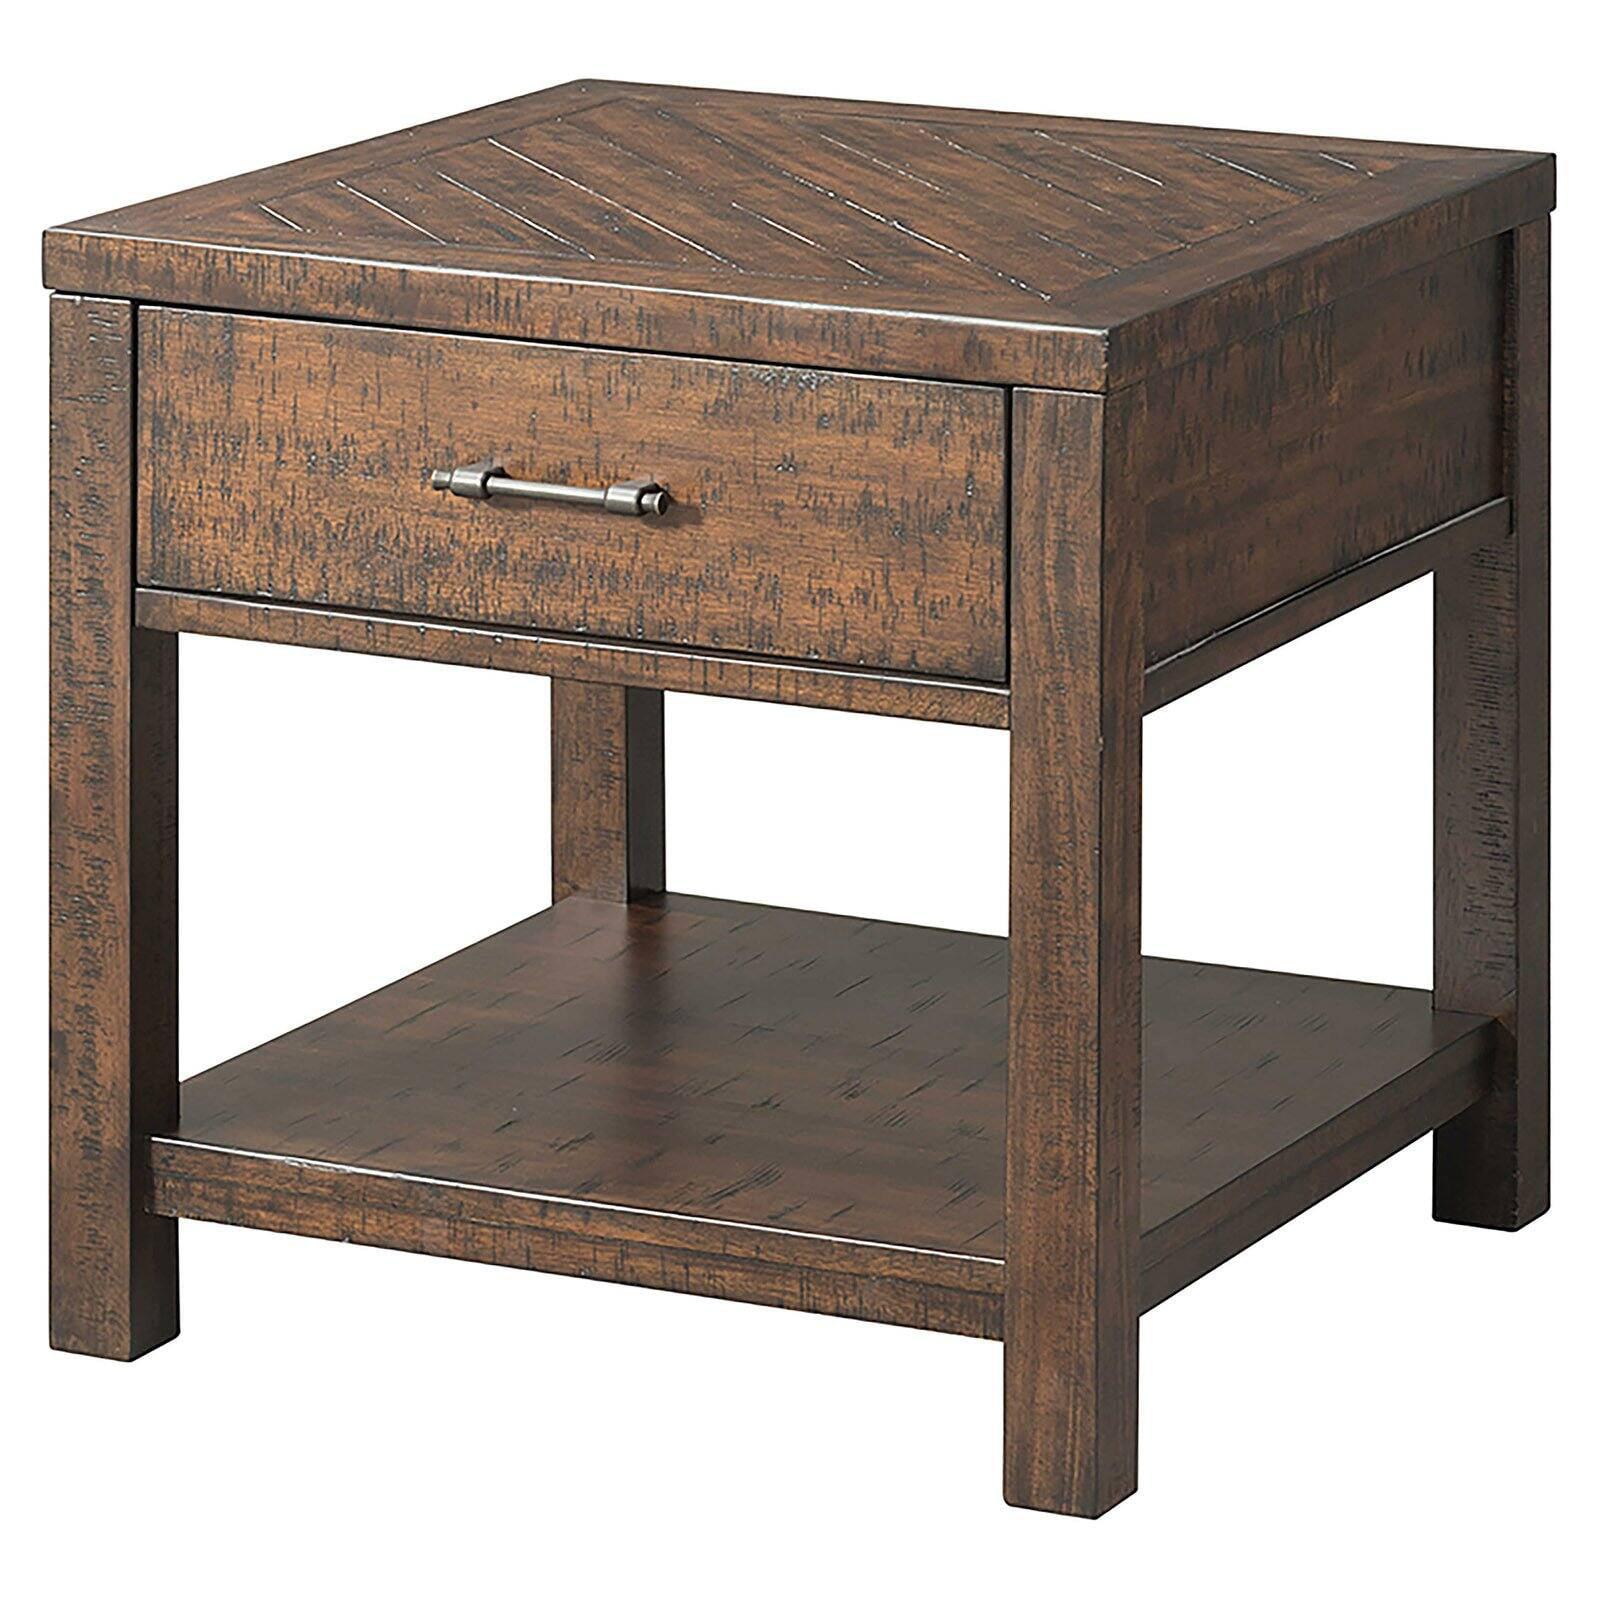 Rustic Walnut Brown Square End Table with Storage Drawer